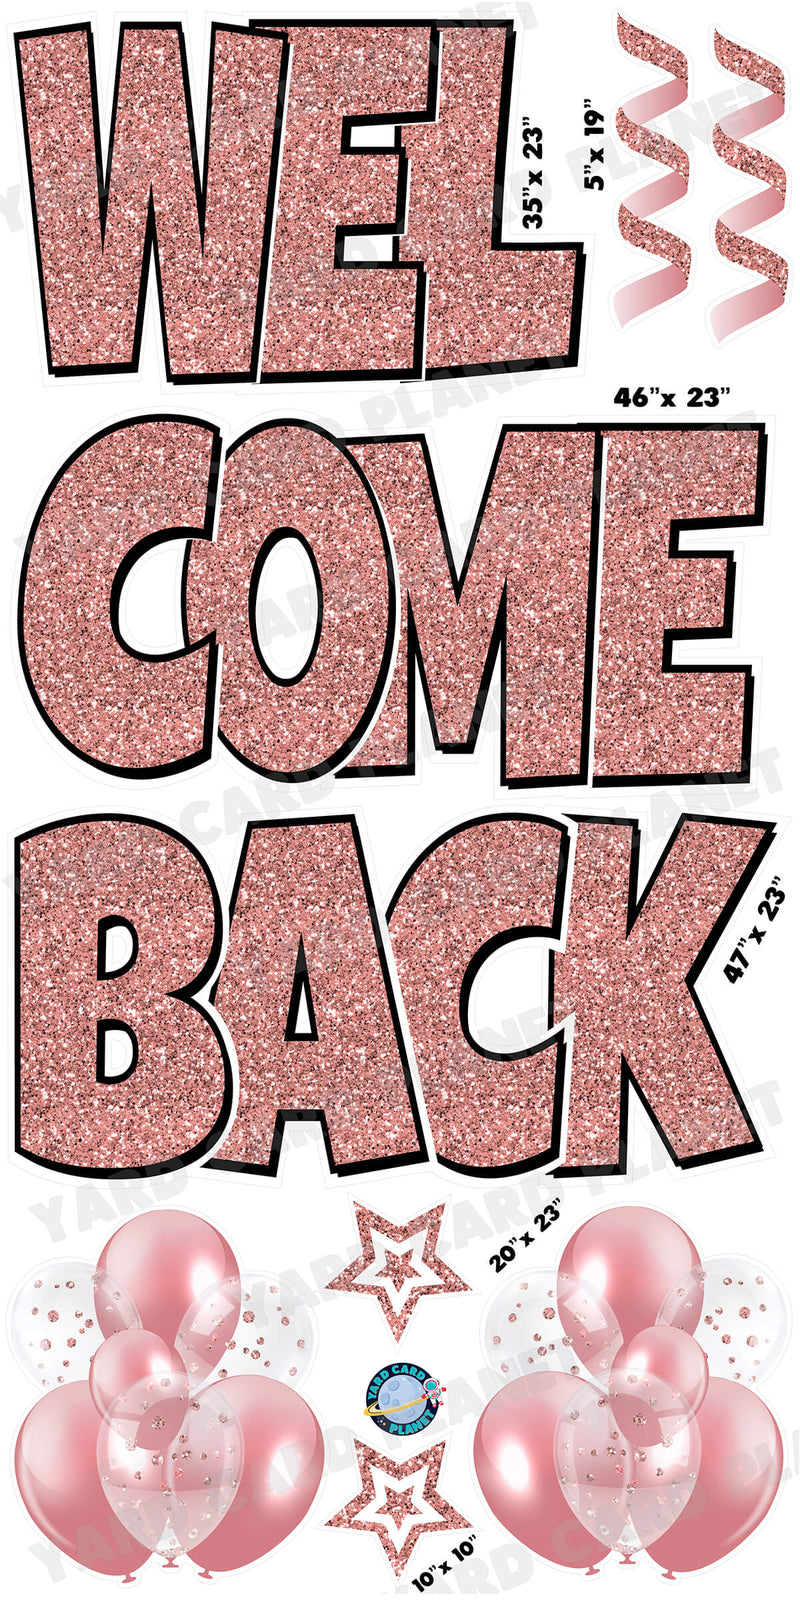 Large 23" Welcome Back Yard Card EZ Quick Sets in Luckiest Guy Font and Flair in Glitter Pattern (Available in Multiple Colors)